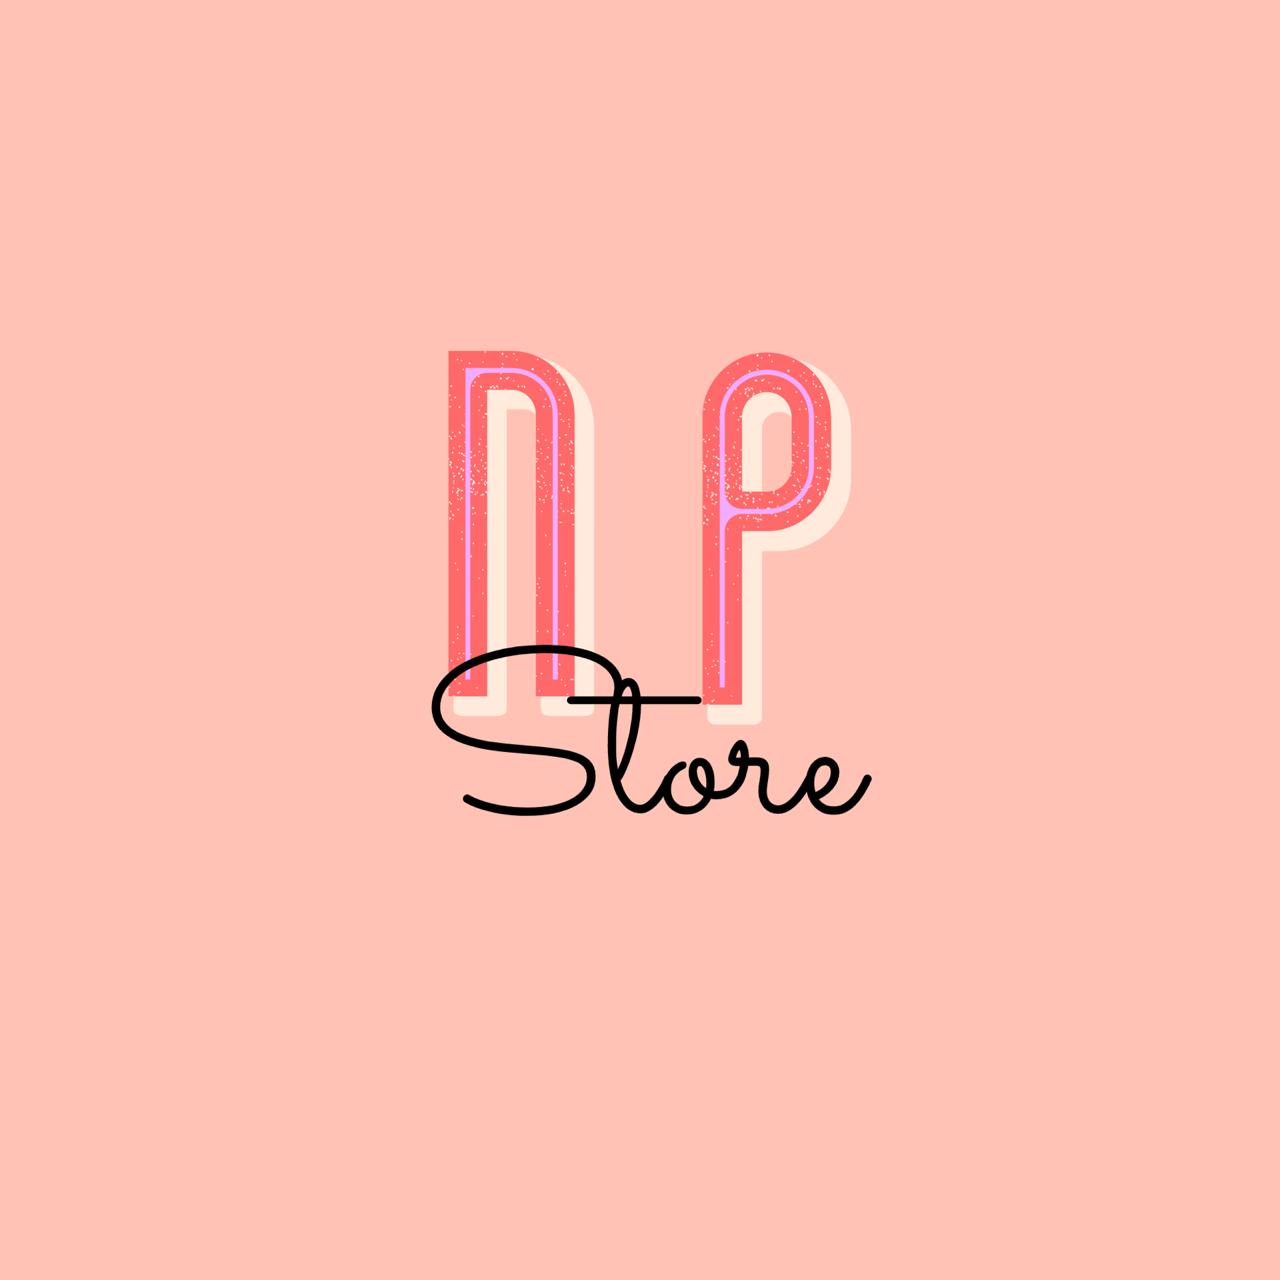 NP Store